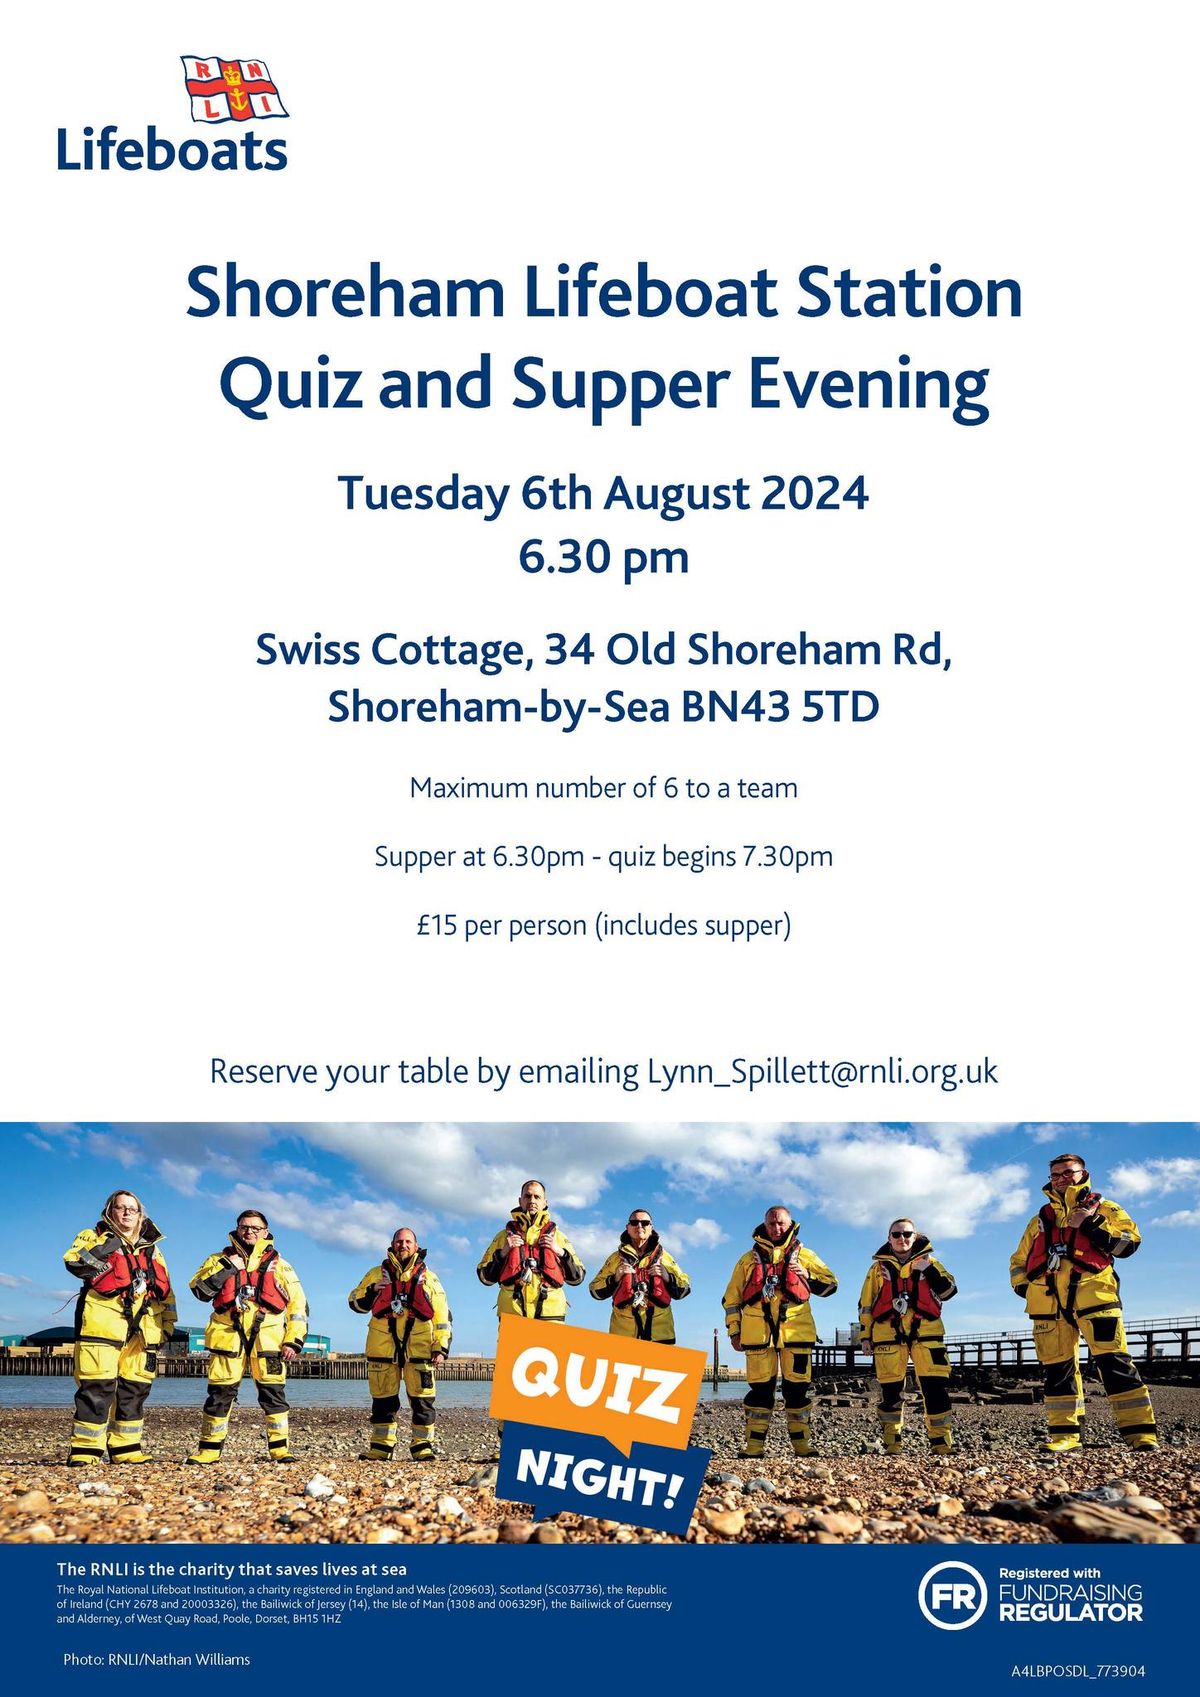 Shoreham Lifeboat Station Quiz and Supper Evening 